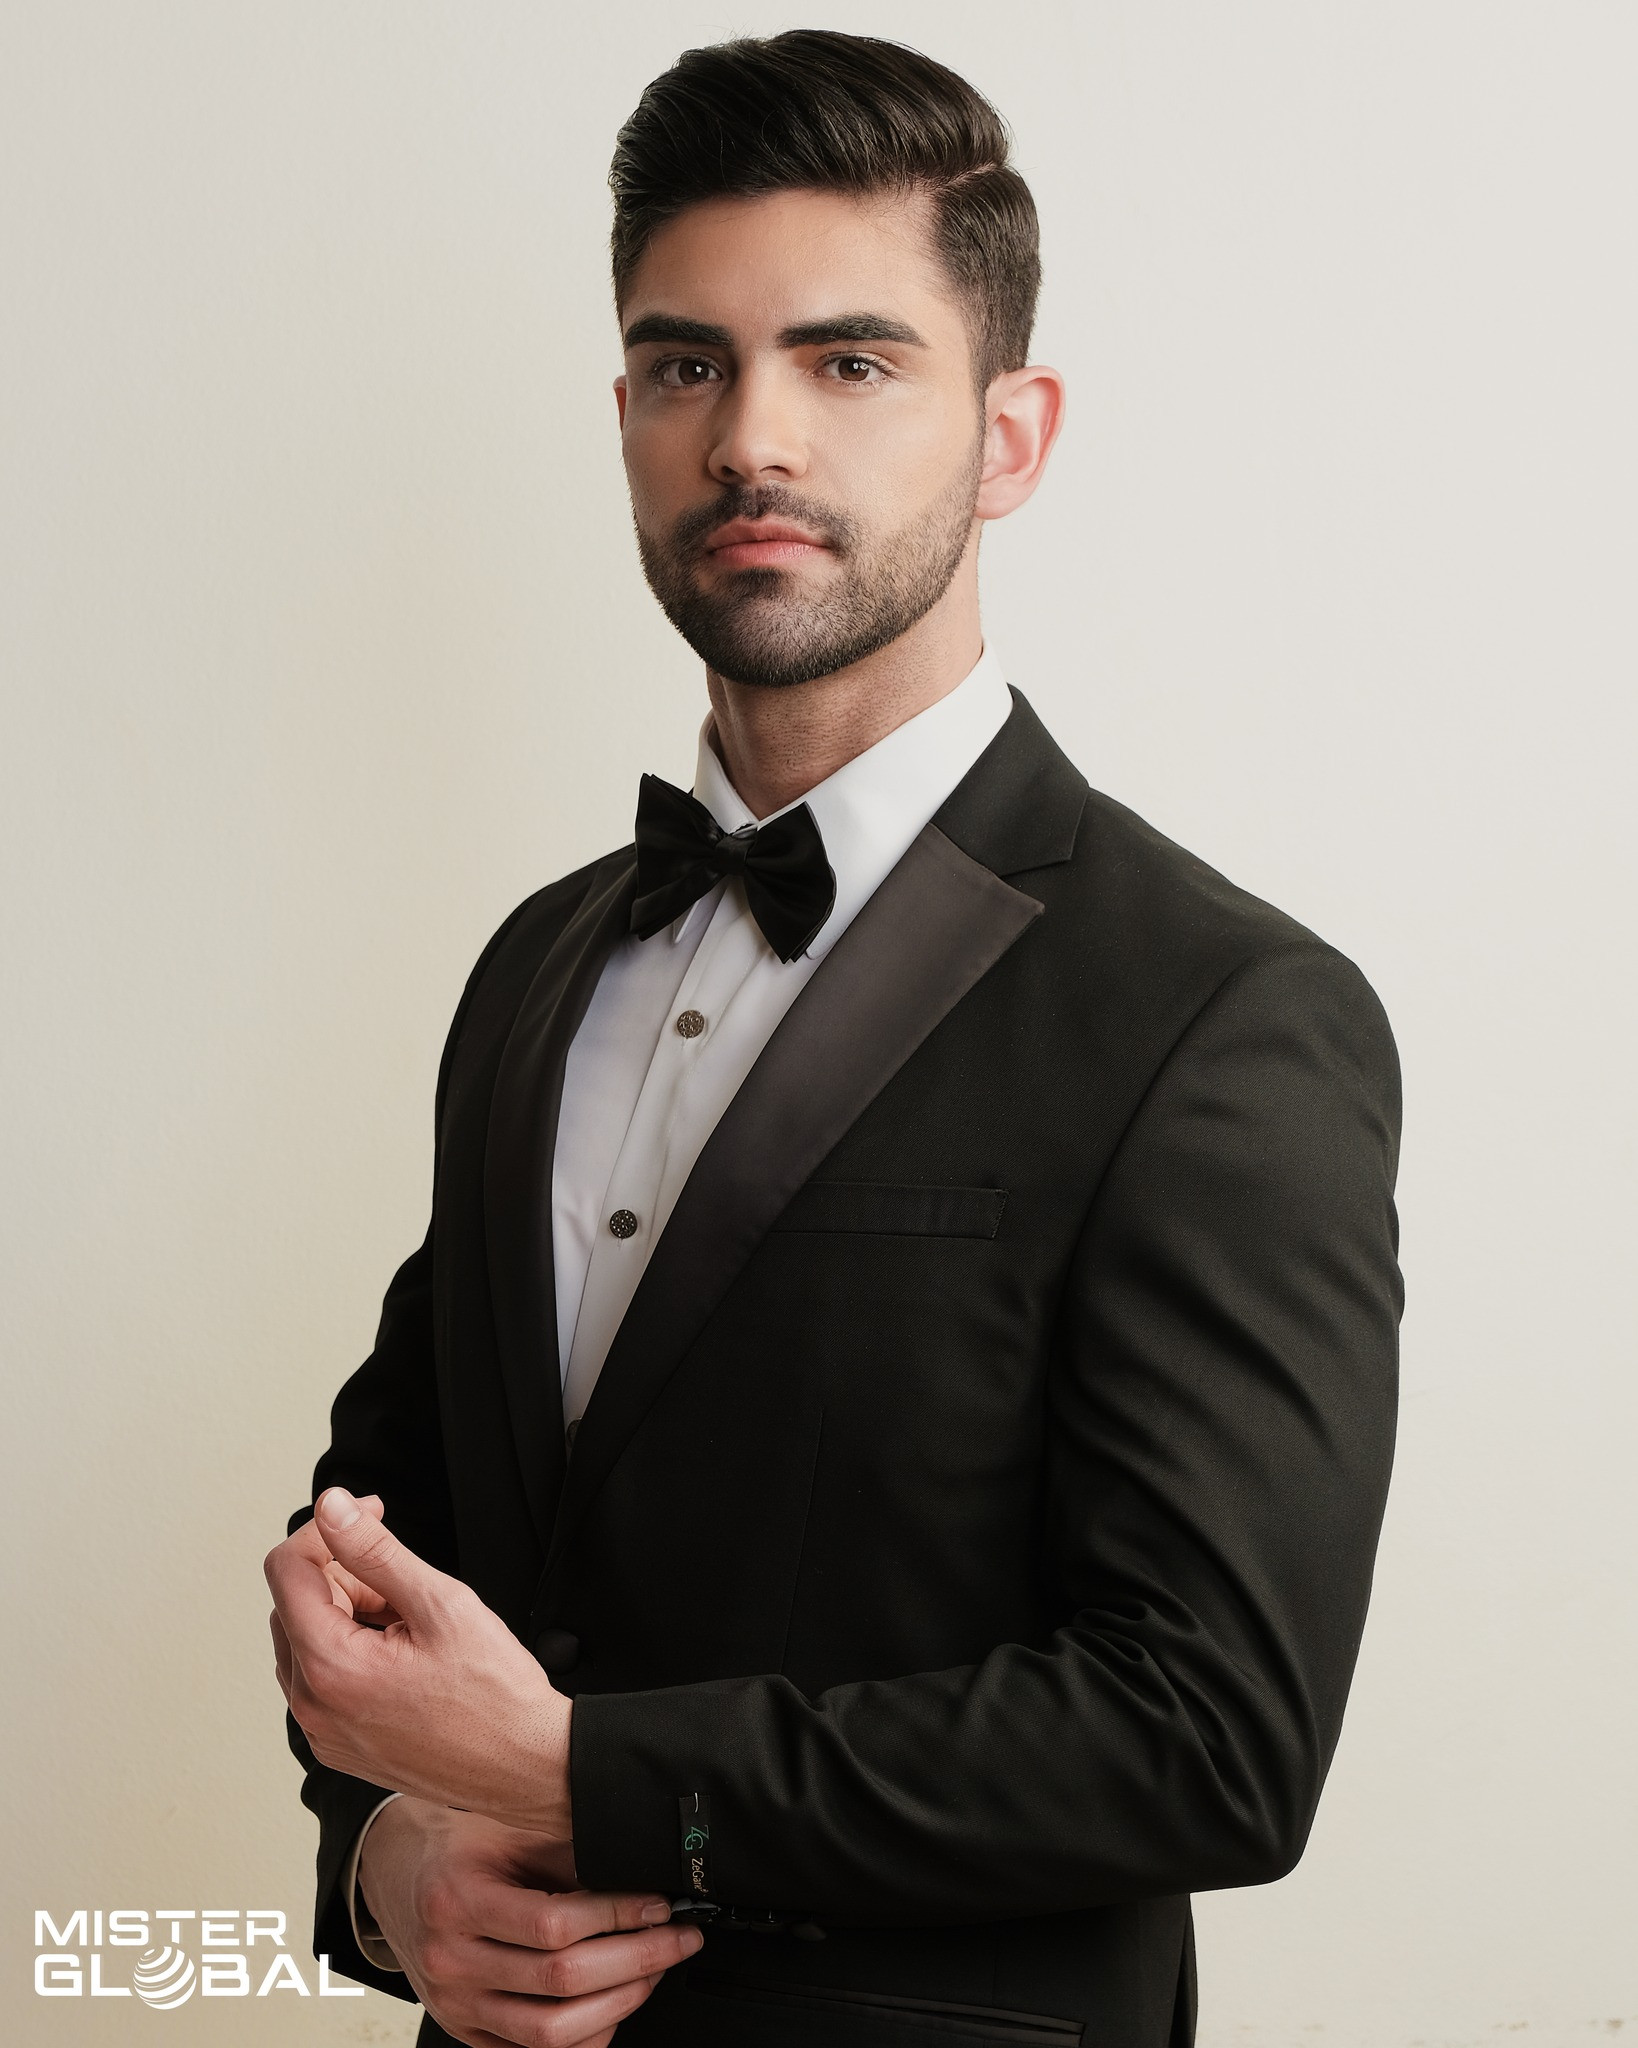 official de candidatos a 8th mr global.  H1yp2DX